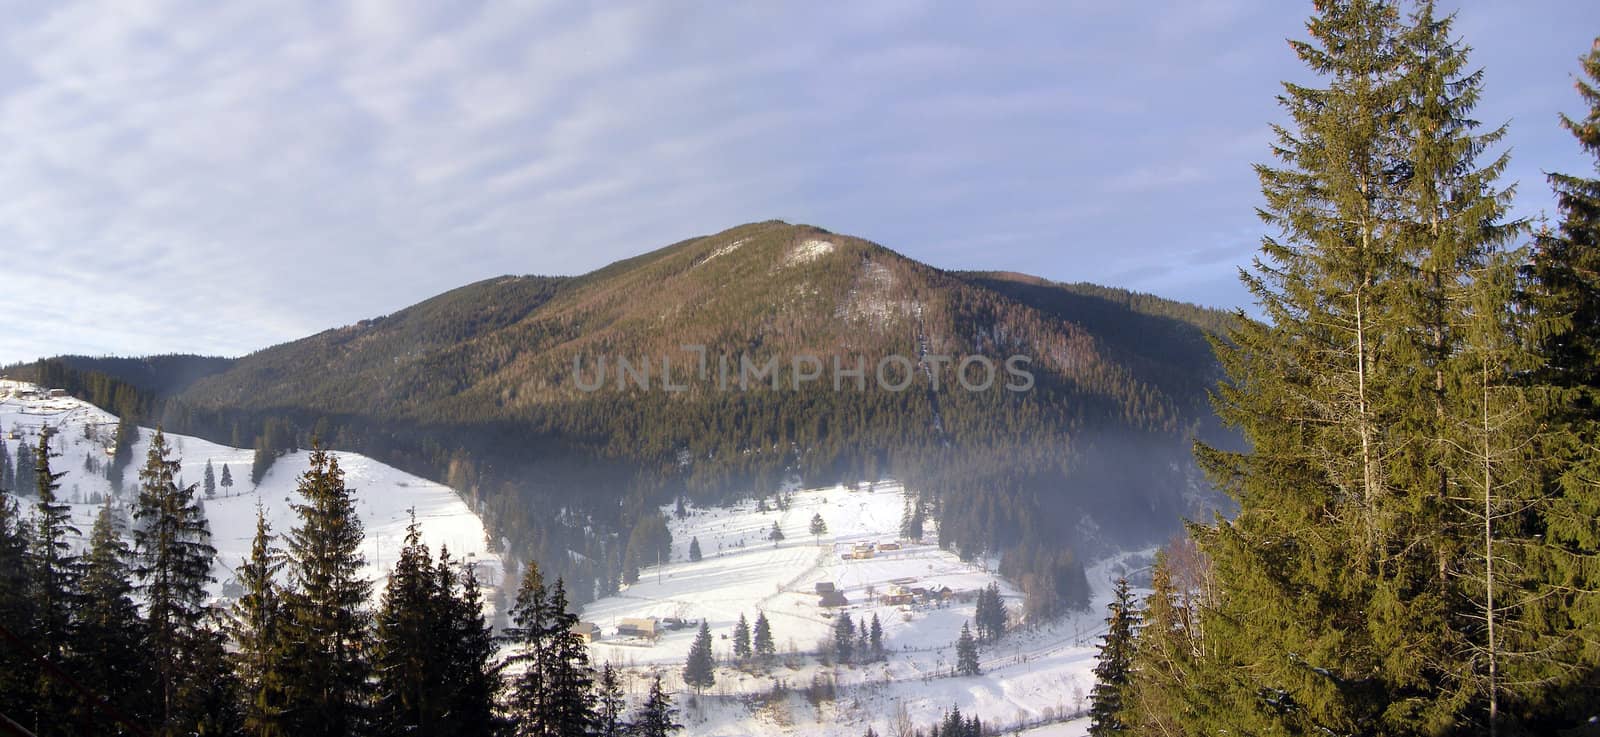 in winter high snowy Carpathian mountains beckon by their beauty and sublimity. 